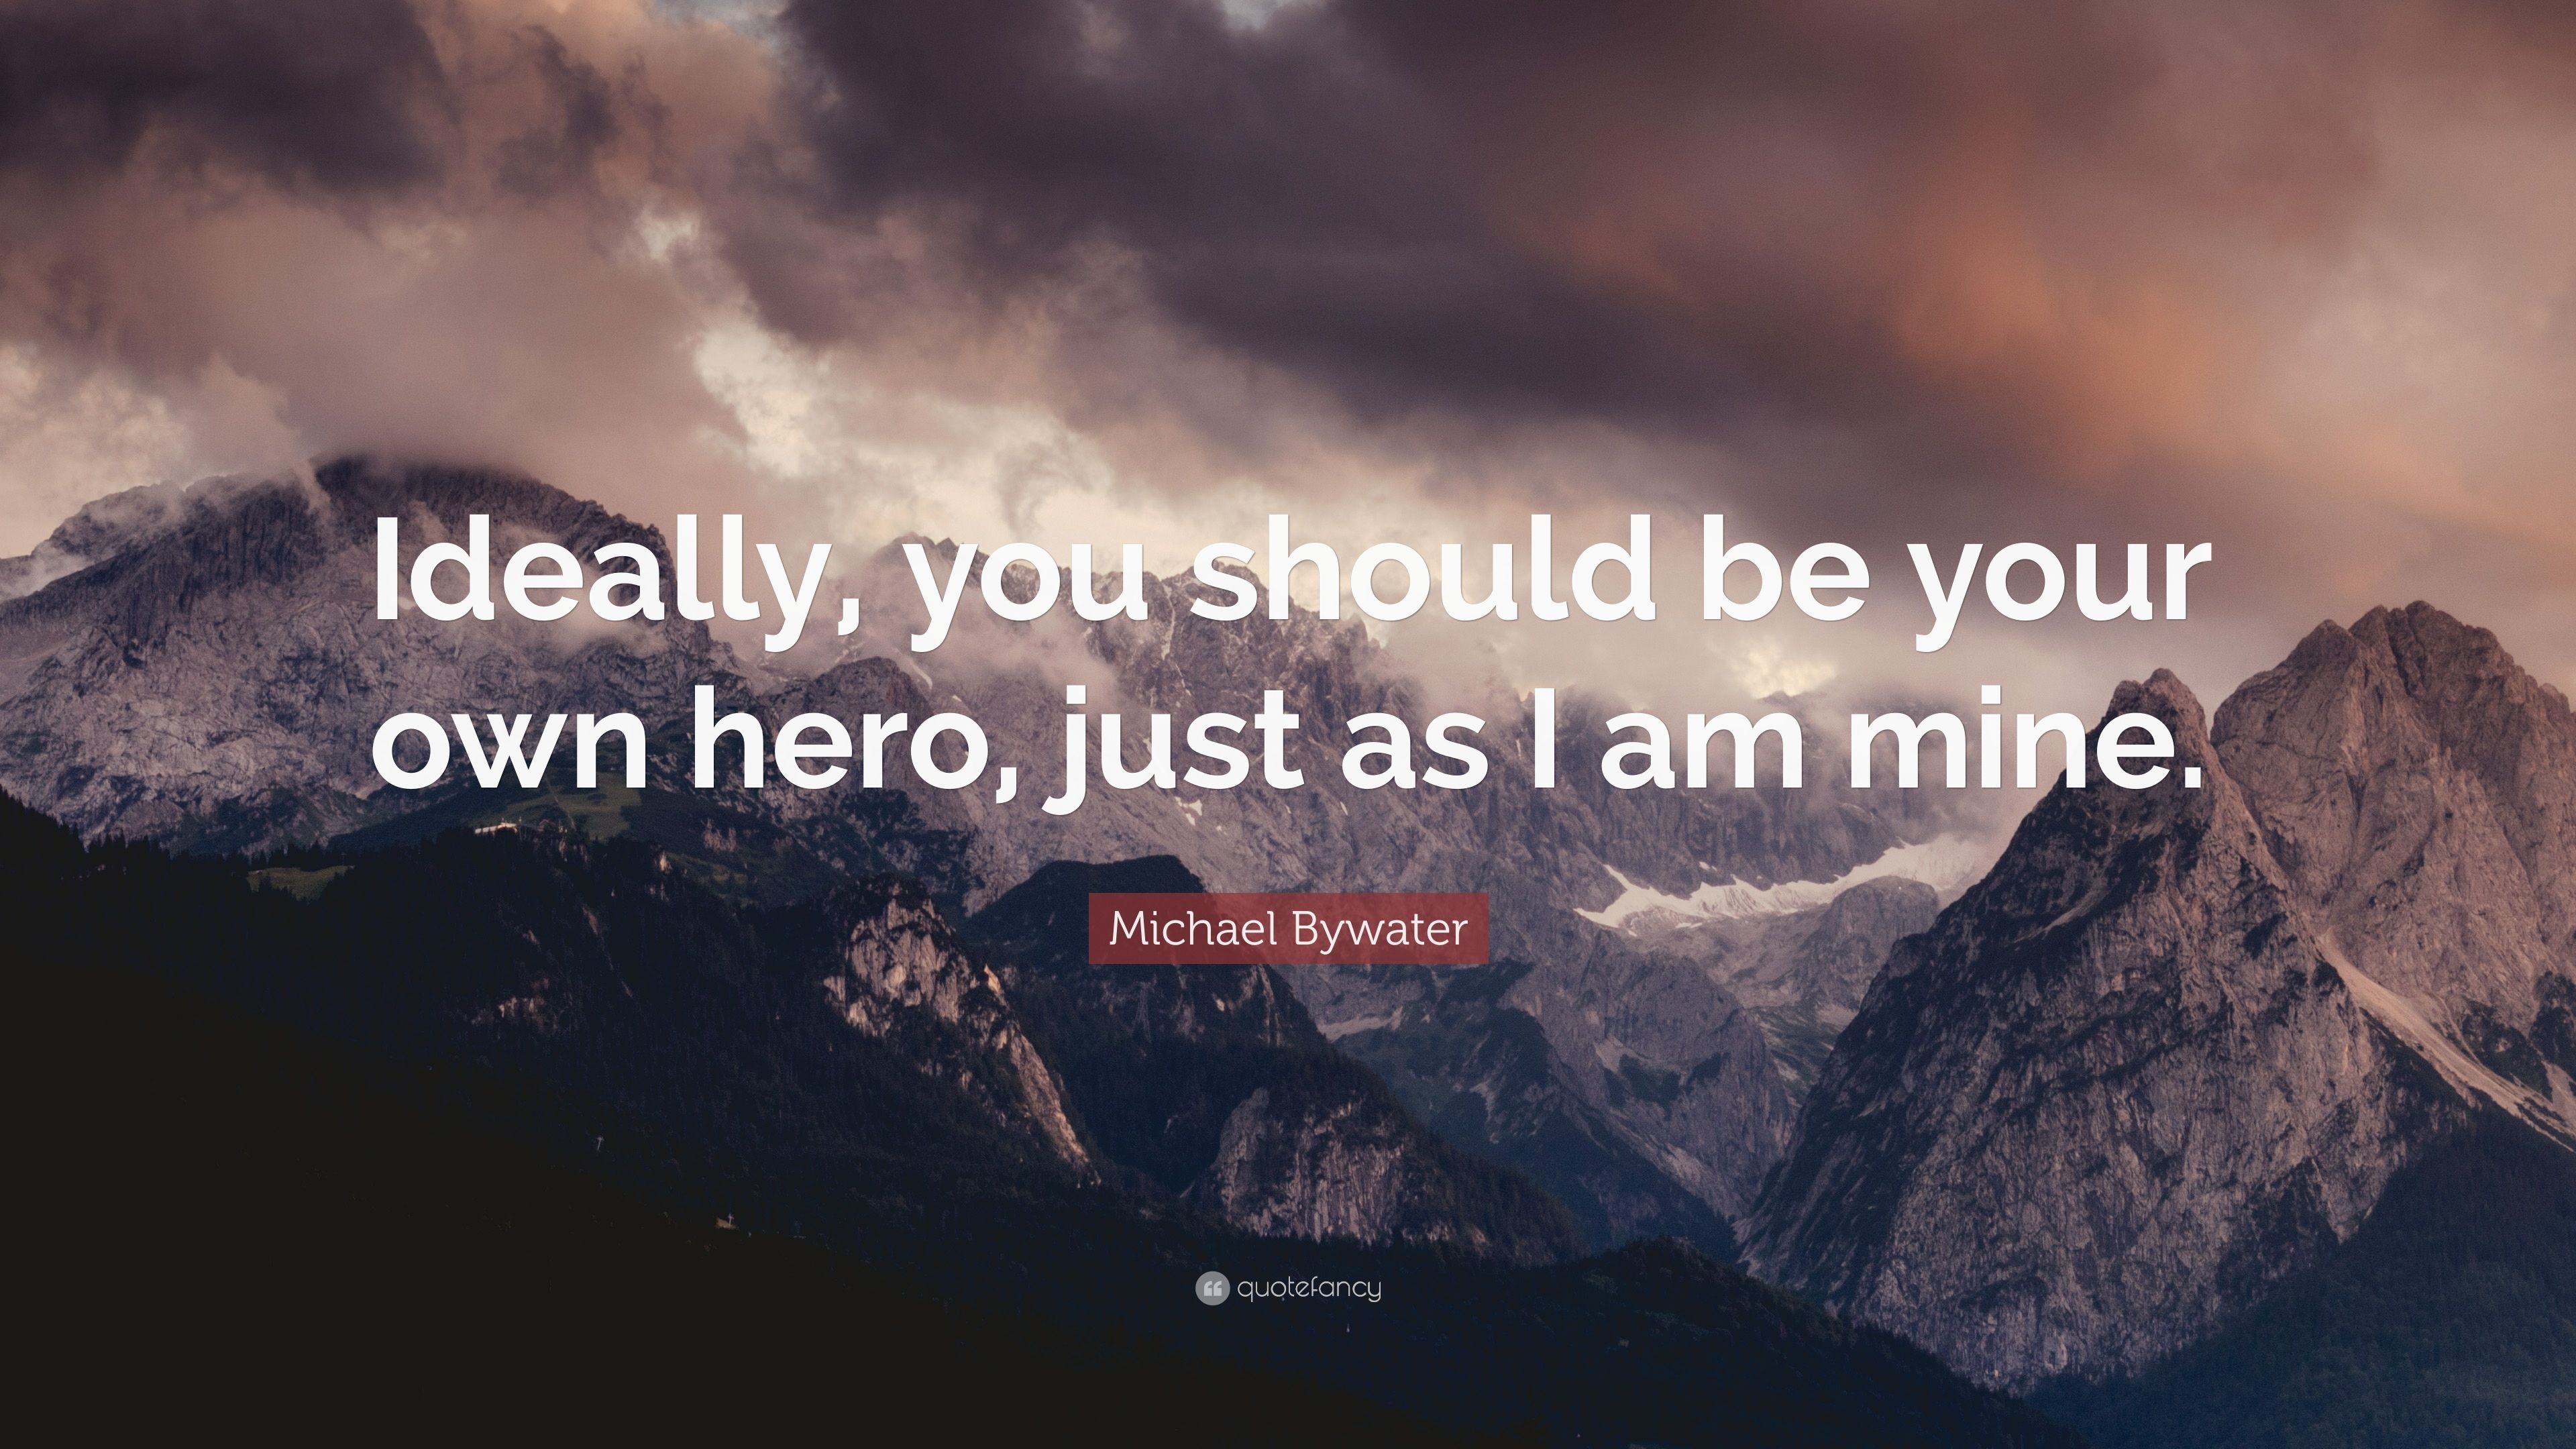 Michael Bywater Quote: “Ideally, you .quotefancy.com